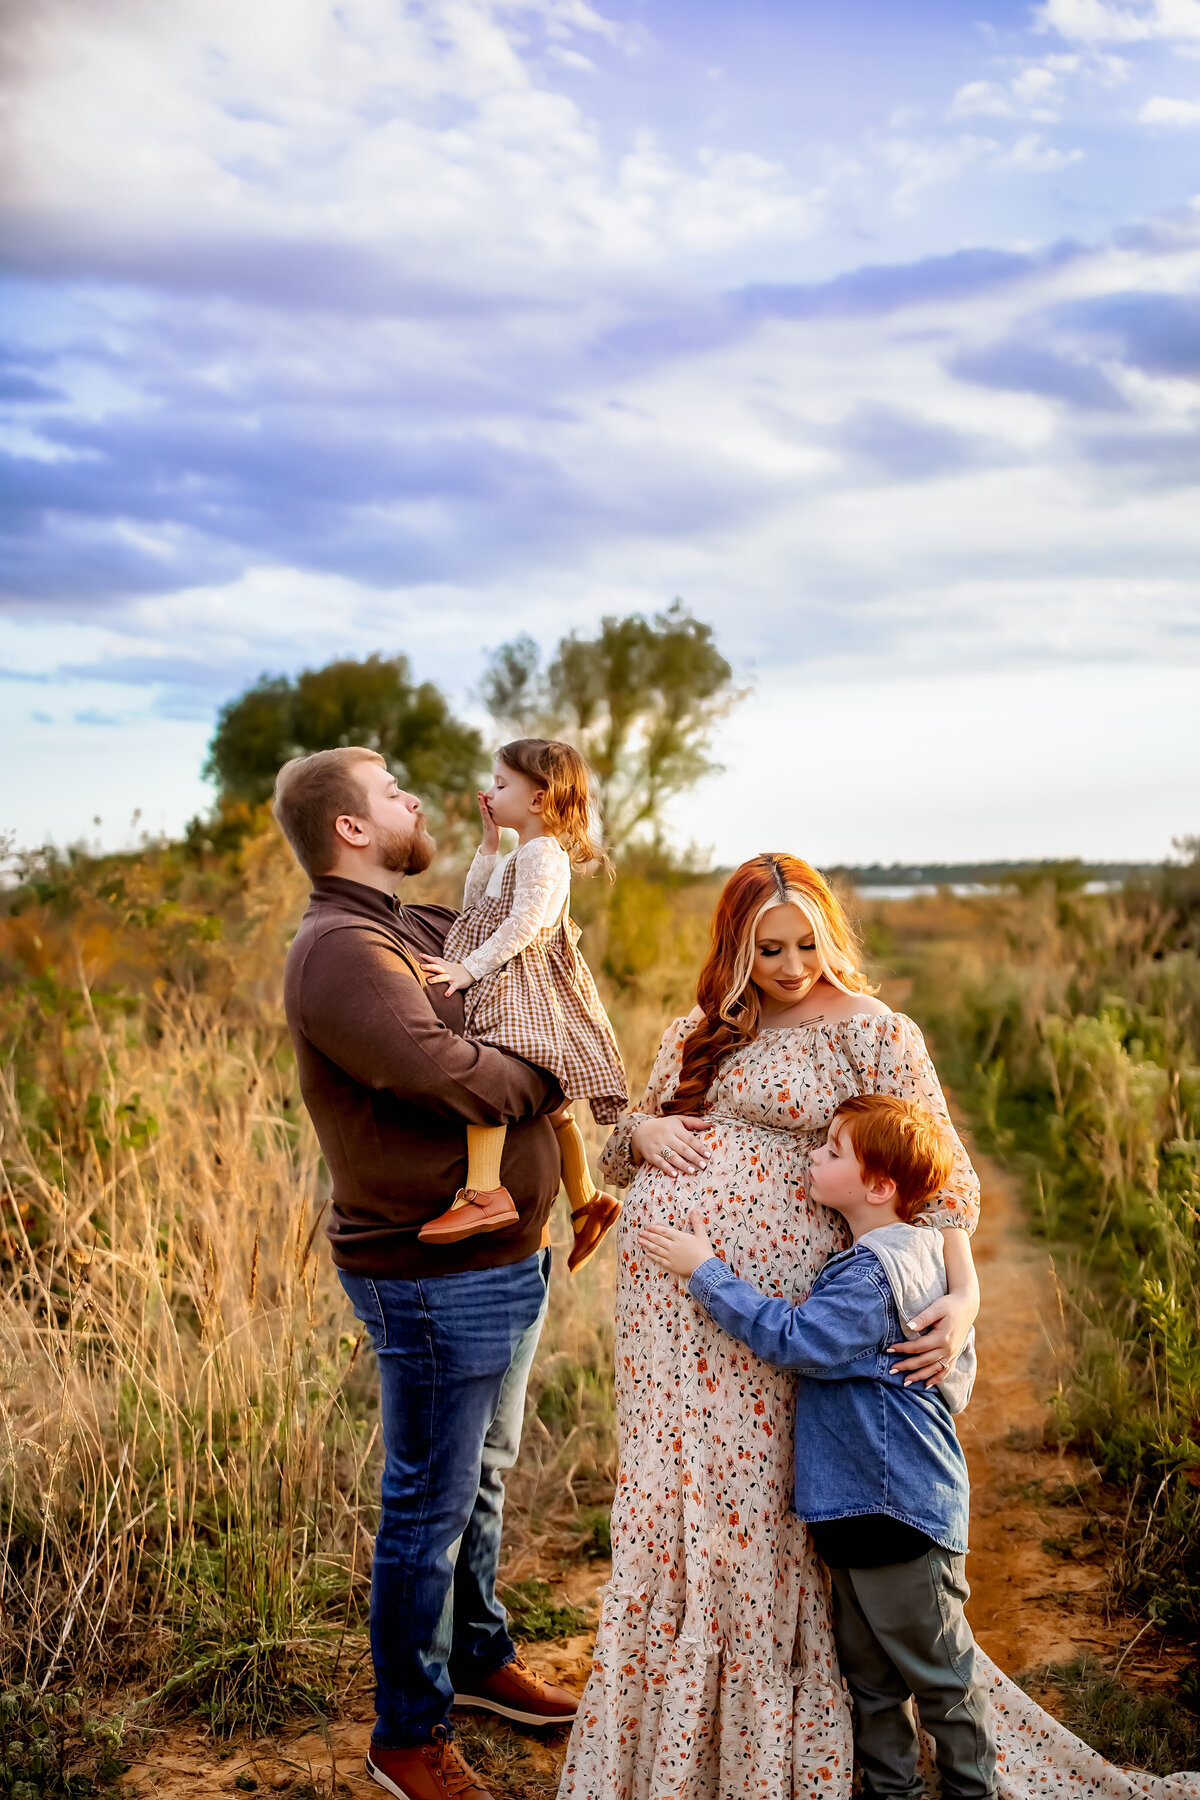 Maternity Session at the lake | Burleson Family and Newborn Photographer